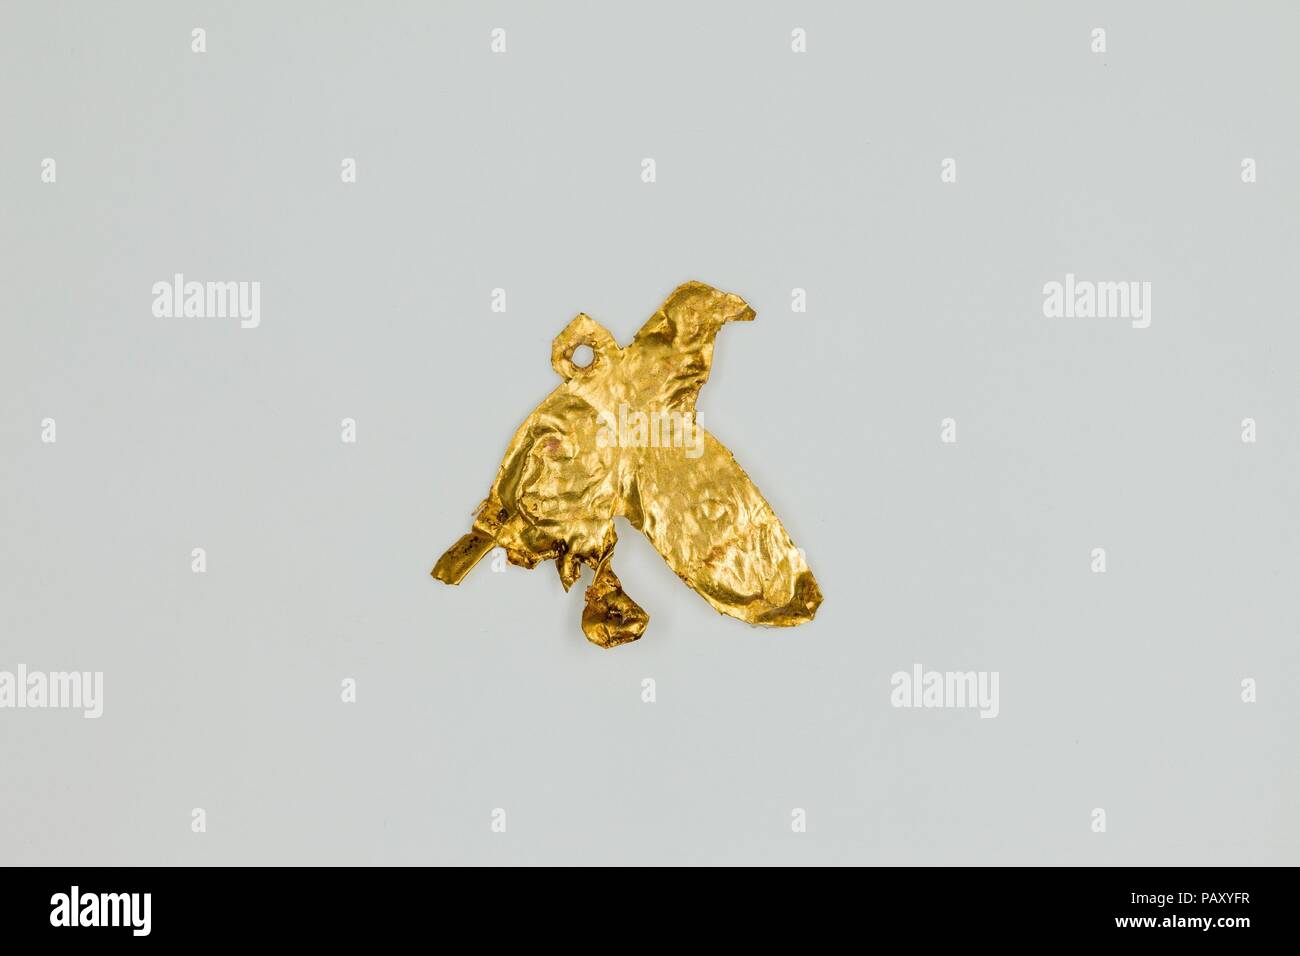 Vulture amulet. Dimensions: l. 2.1 cm (13/16 in.) × h. 1.9 cm (3/4 in.). Dynasty: Dynasty 26-29. Date: 664-380 B.C.. Museum: Metropolitan Museum of Art, New York, USA. Stock Photo